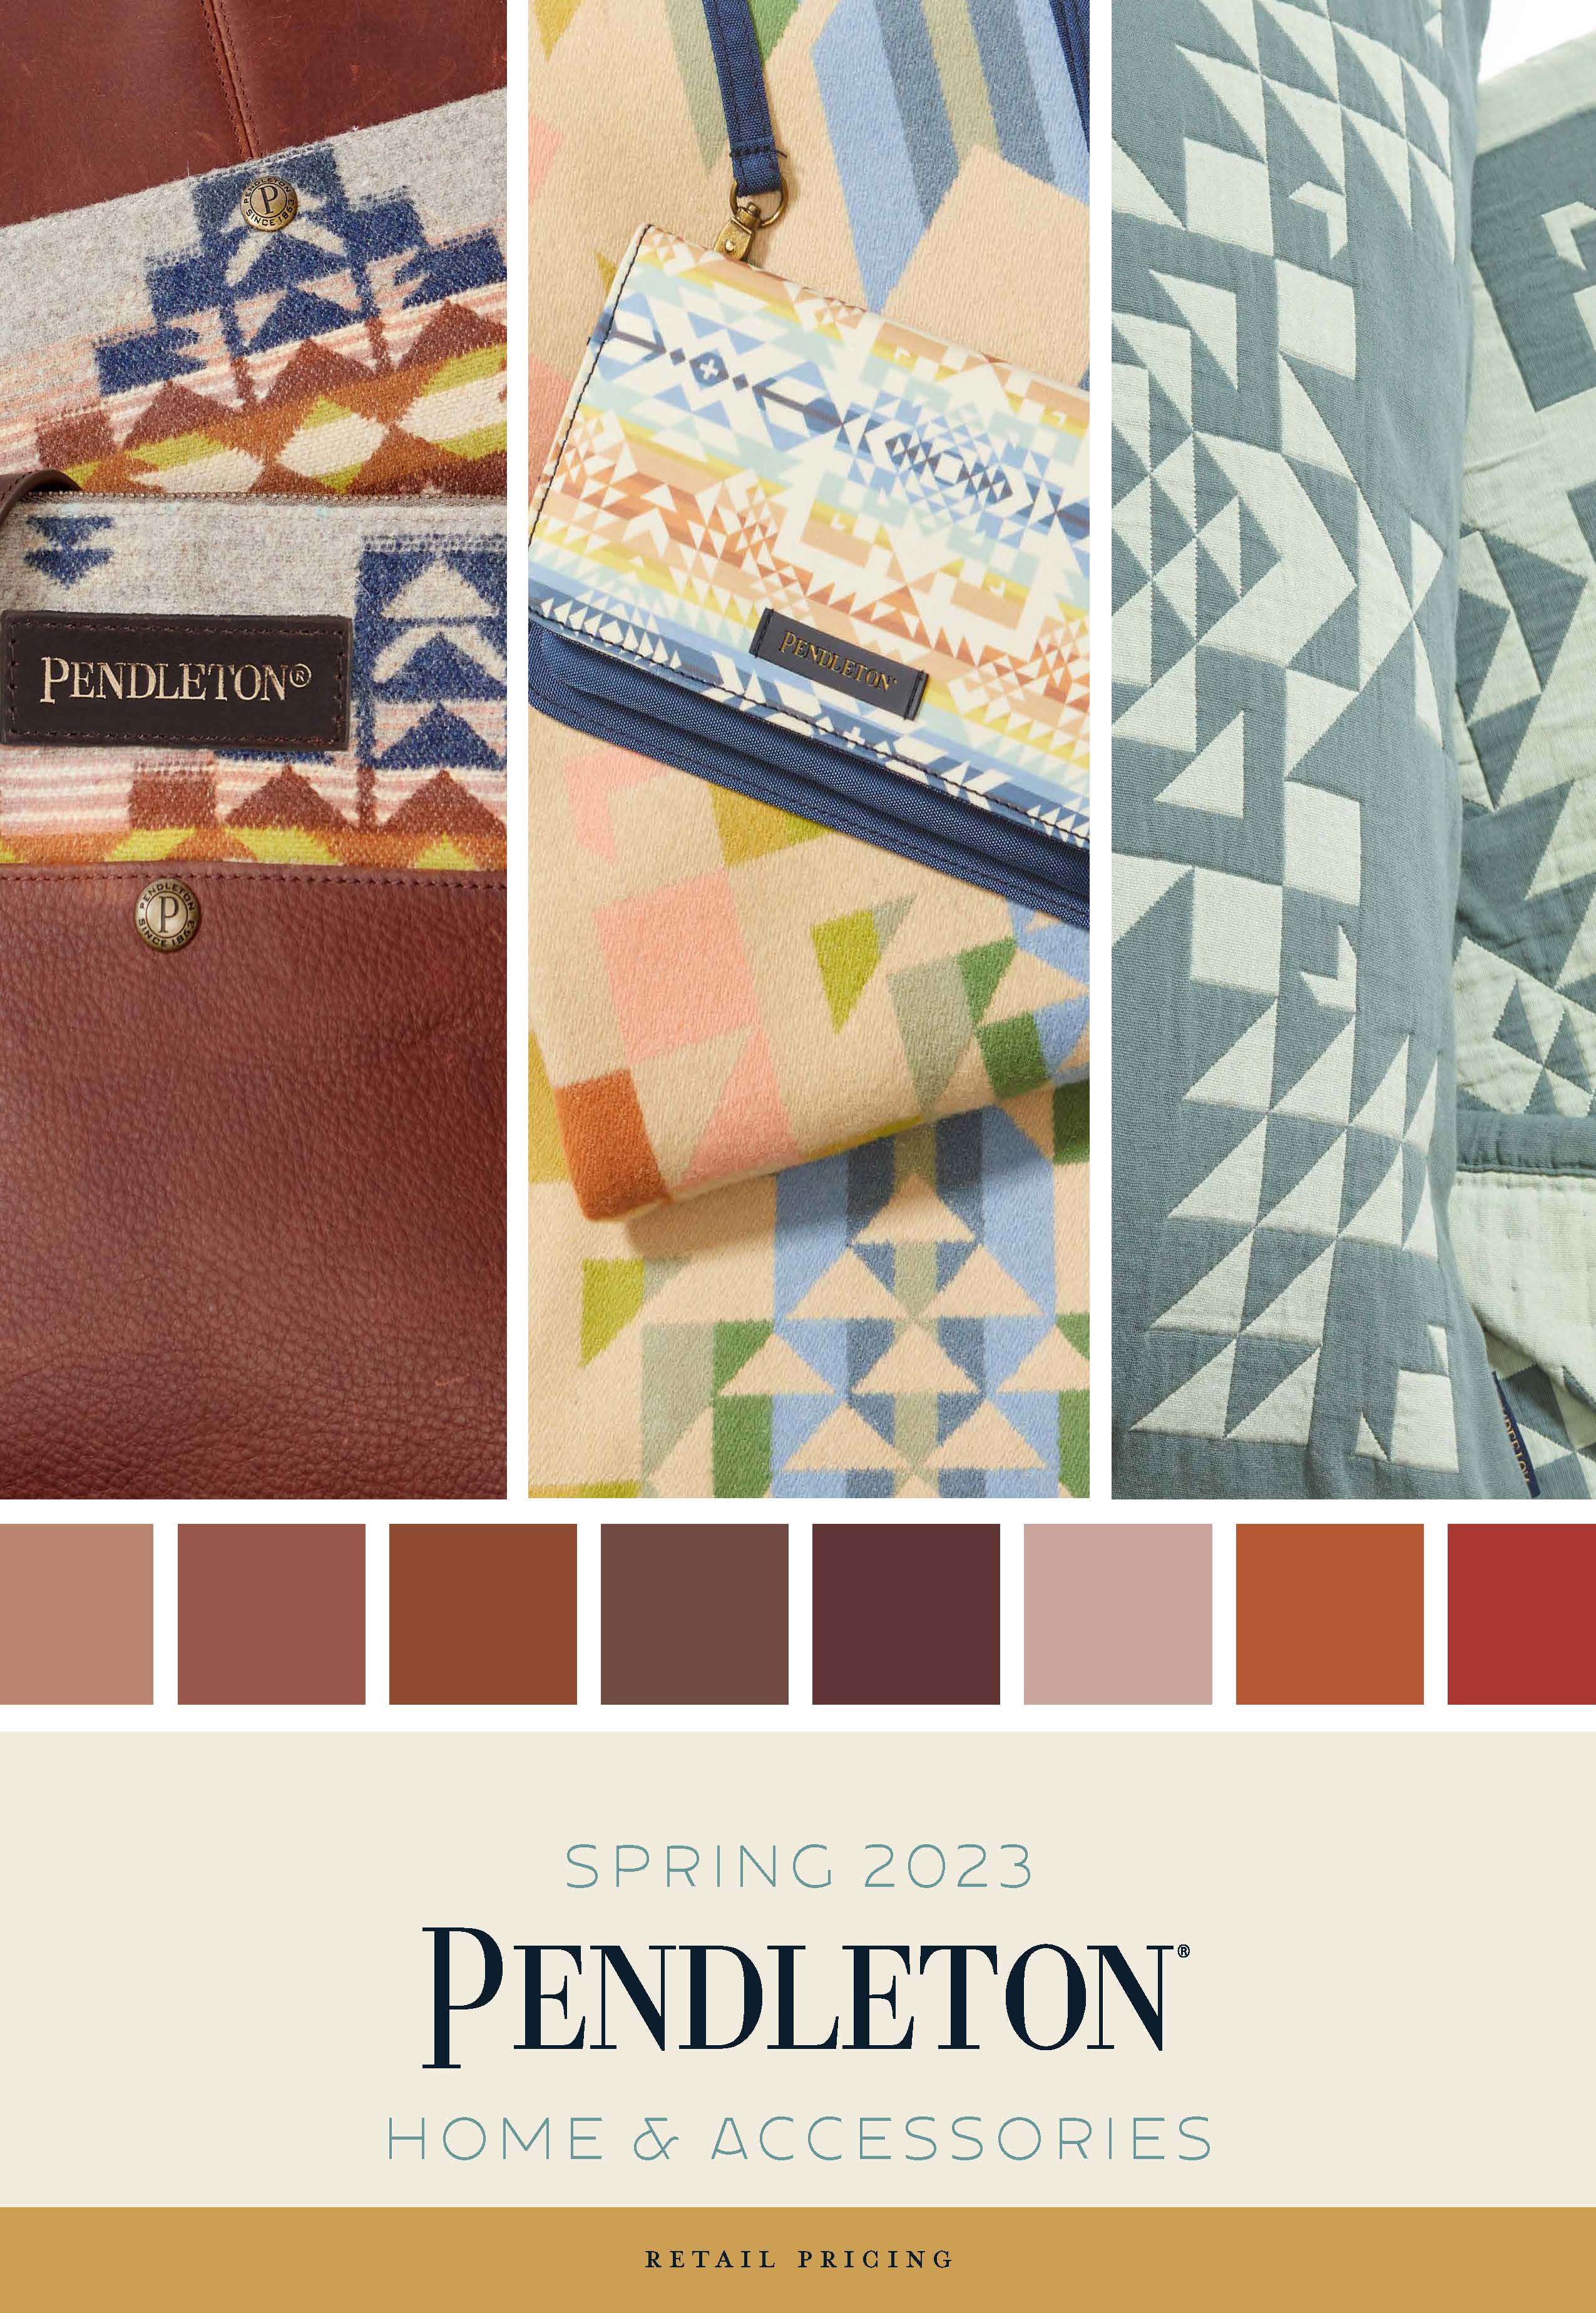 Pendleton Accessories and Home Spring 2023 Linebook